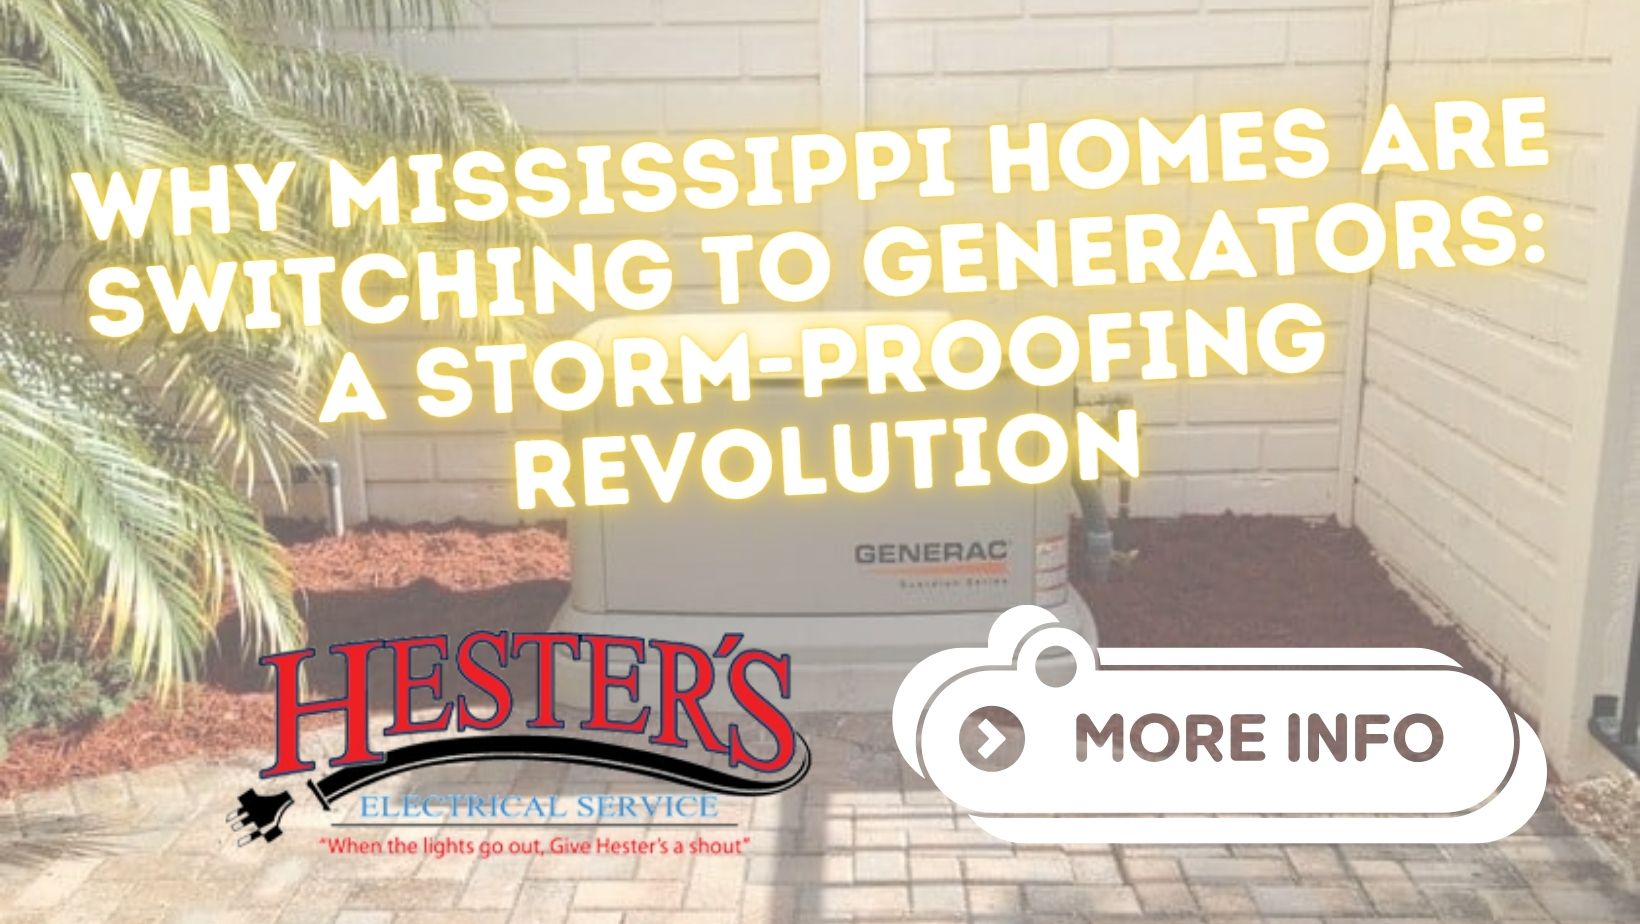 Why Mississippi Homes Are Switching to Generators: A Storm-Proofing Revolution